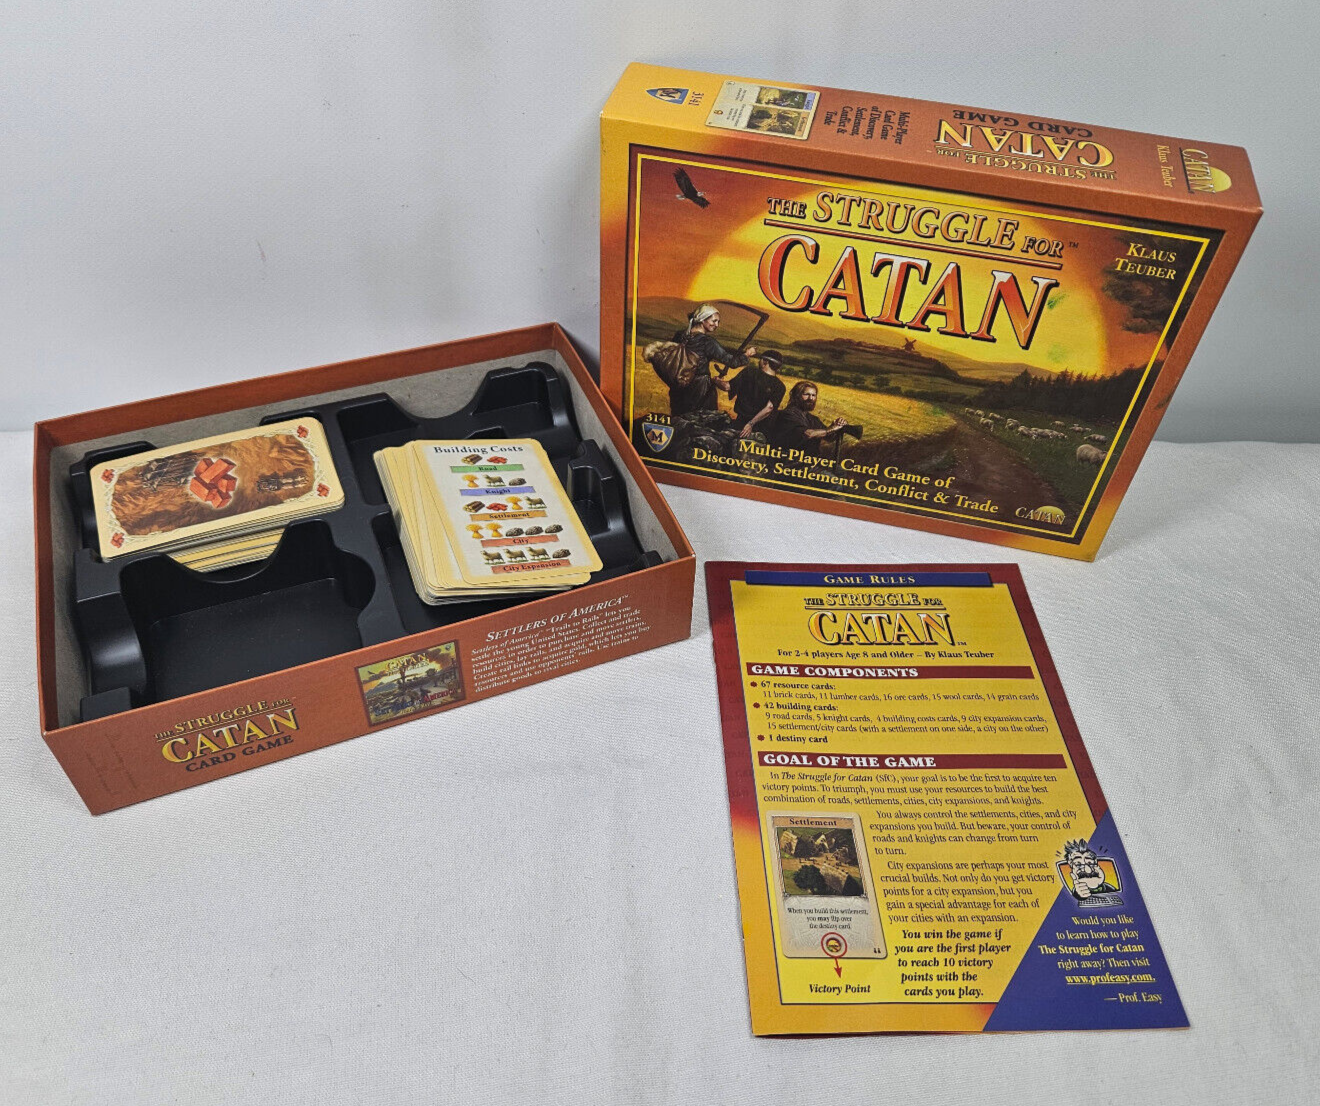 The Struggle For Catan Multiplayer Card Game 2011 Mayfair Games Complete - $14.95